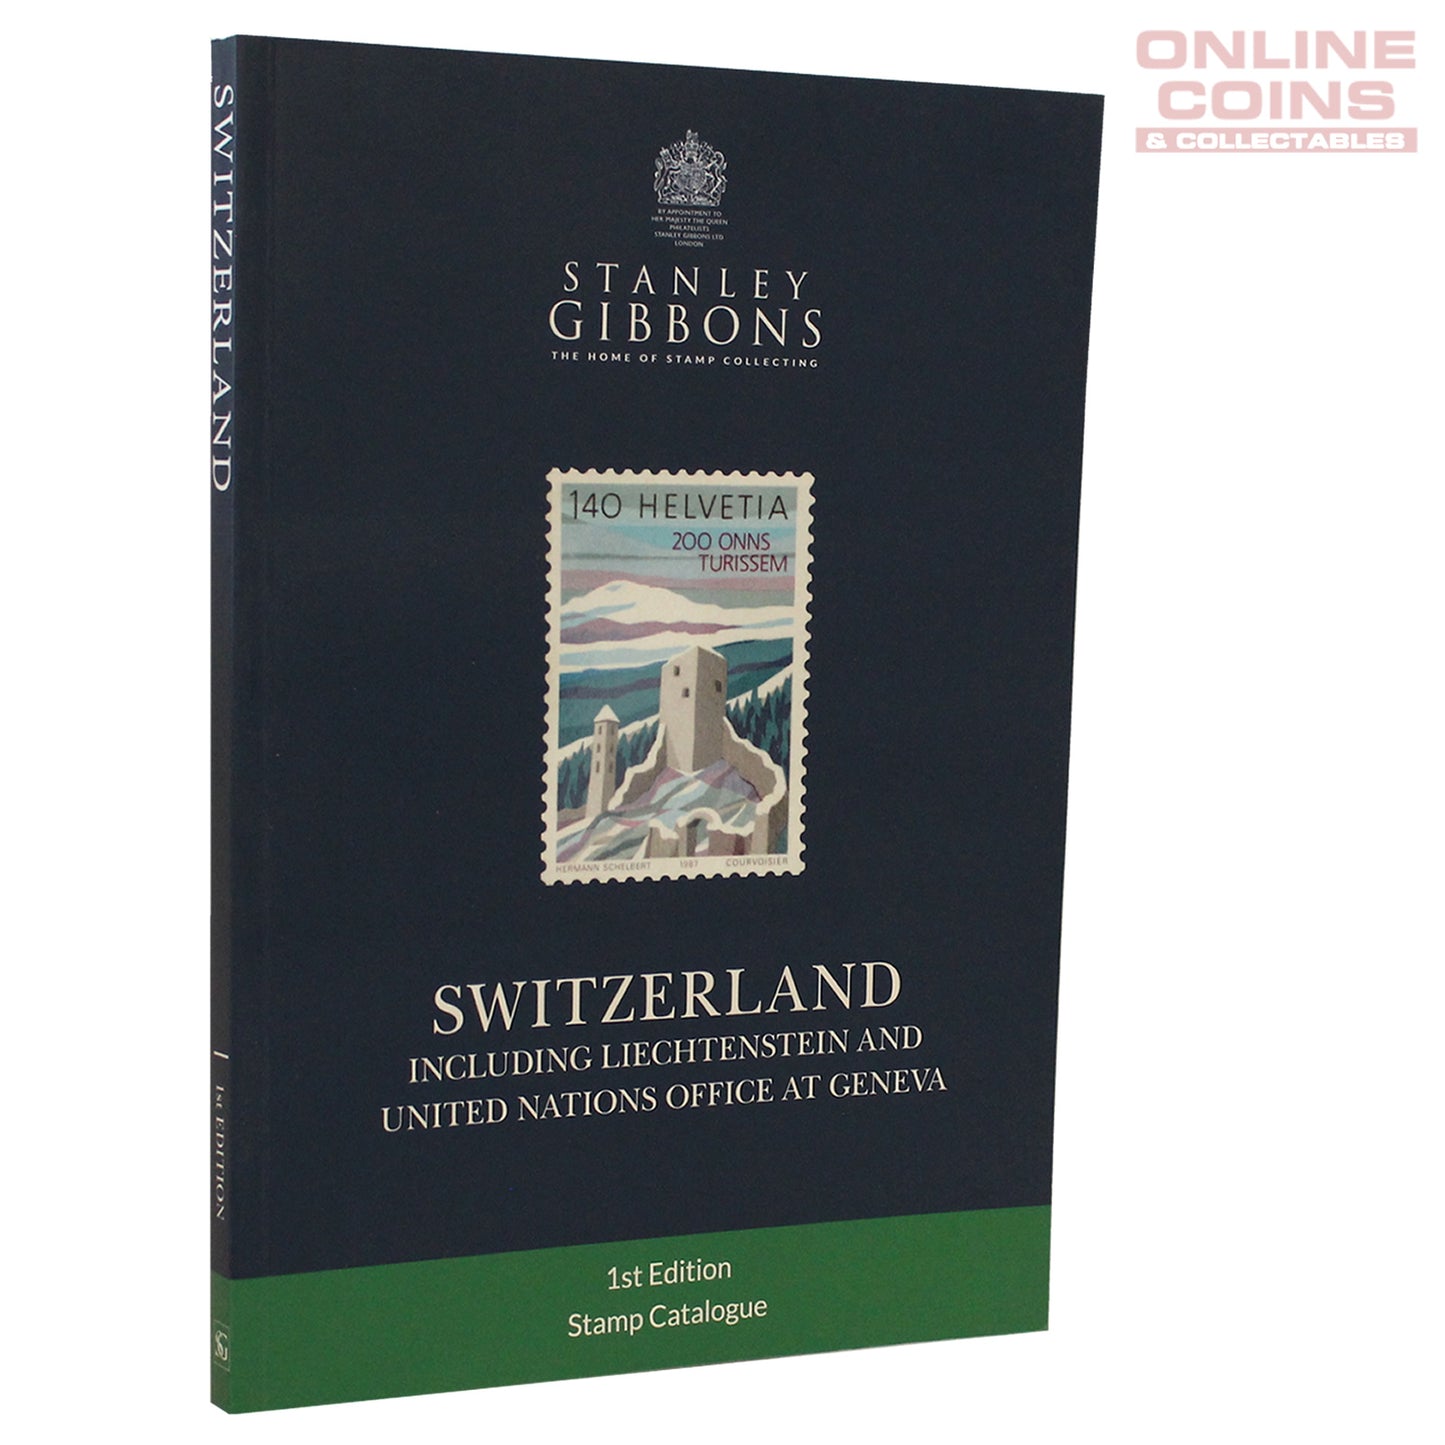 Stanley Gibbons - Switzerland 1st Edition Stamp Catalogue